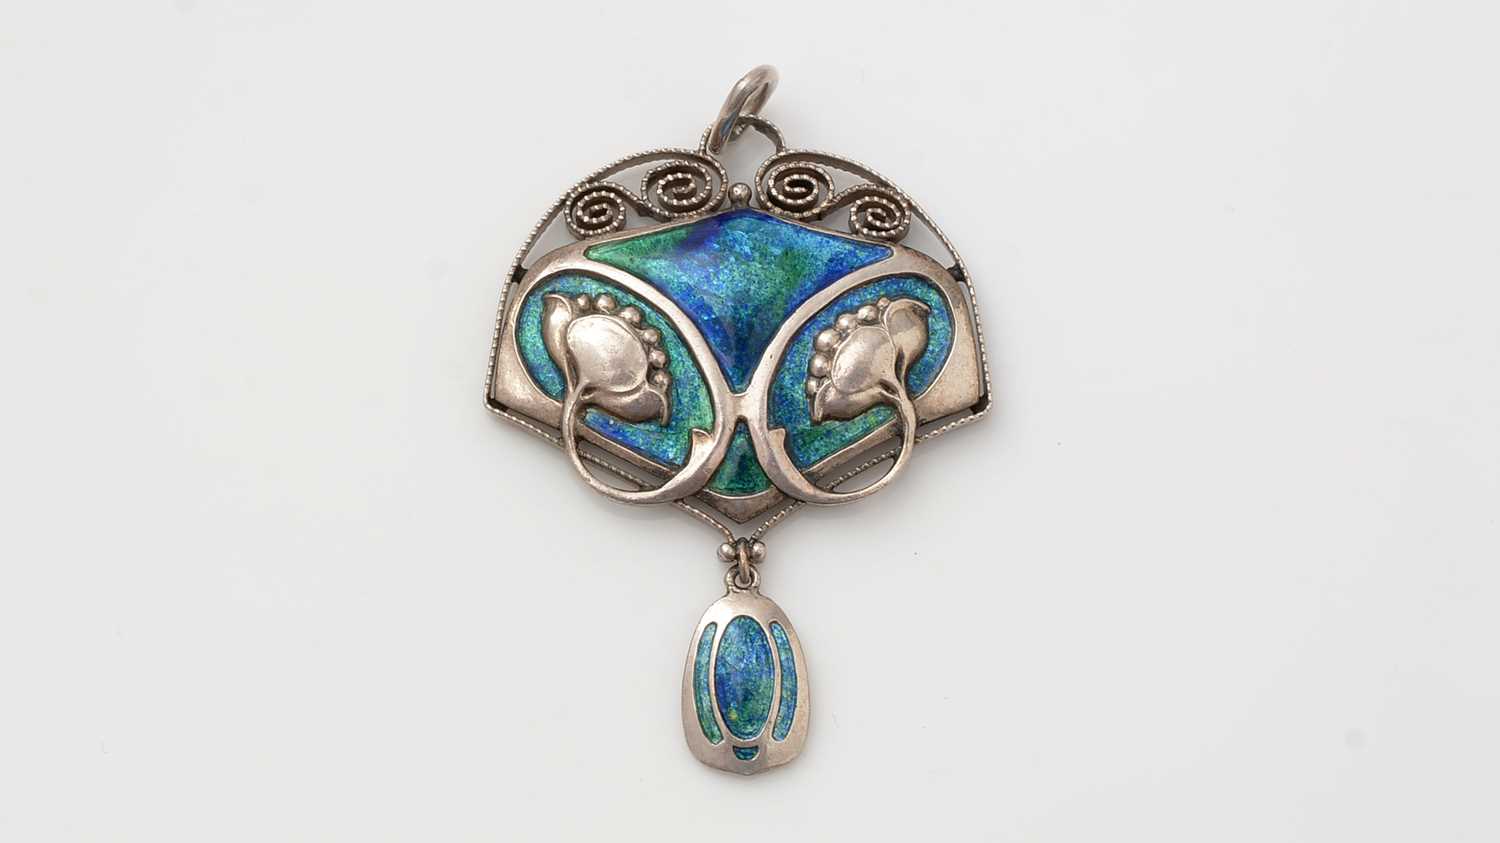 Lot 408 - Murrle Bennett & Co: a silver and enamel Arts and Crafts pendant